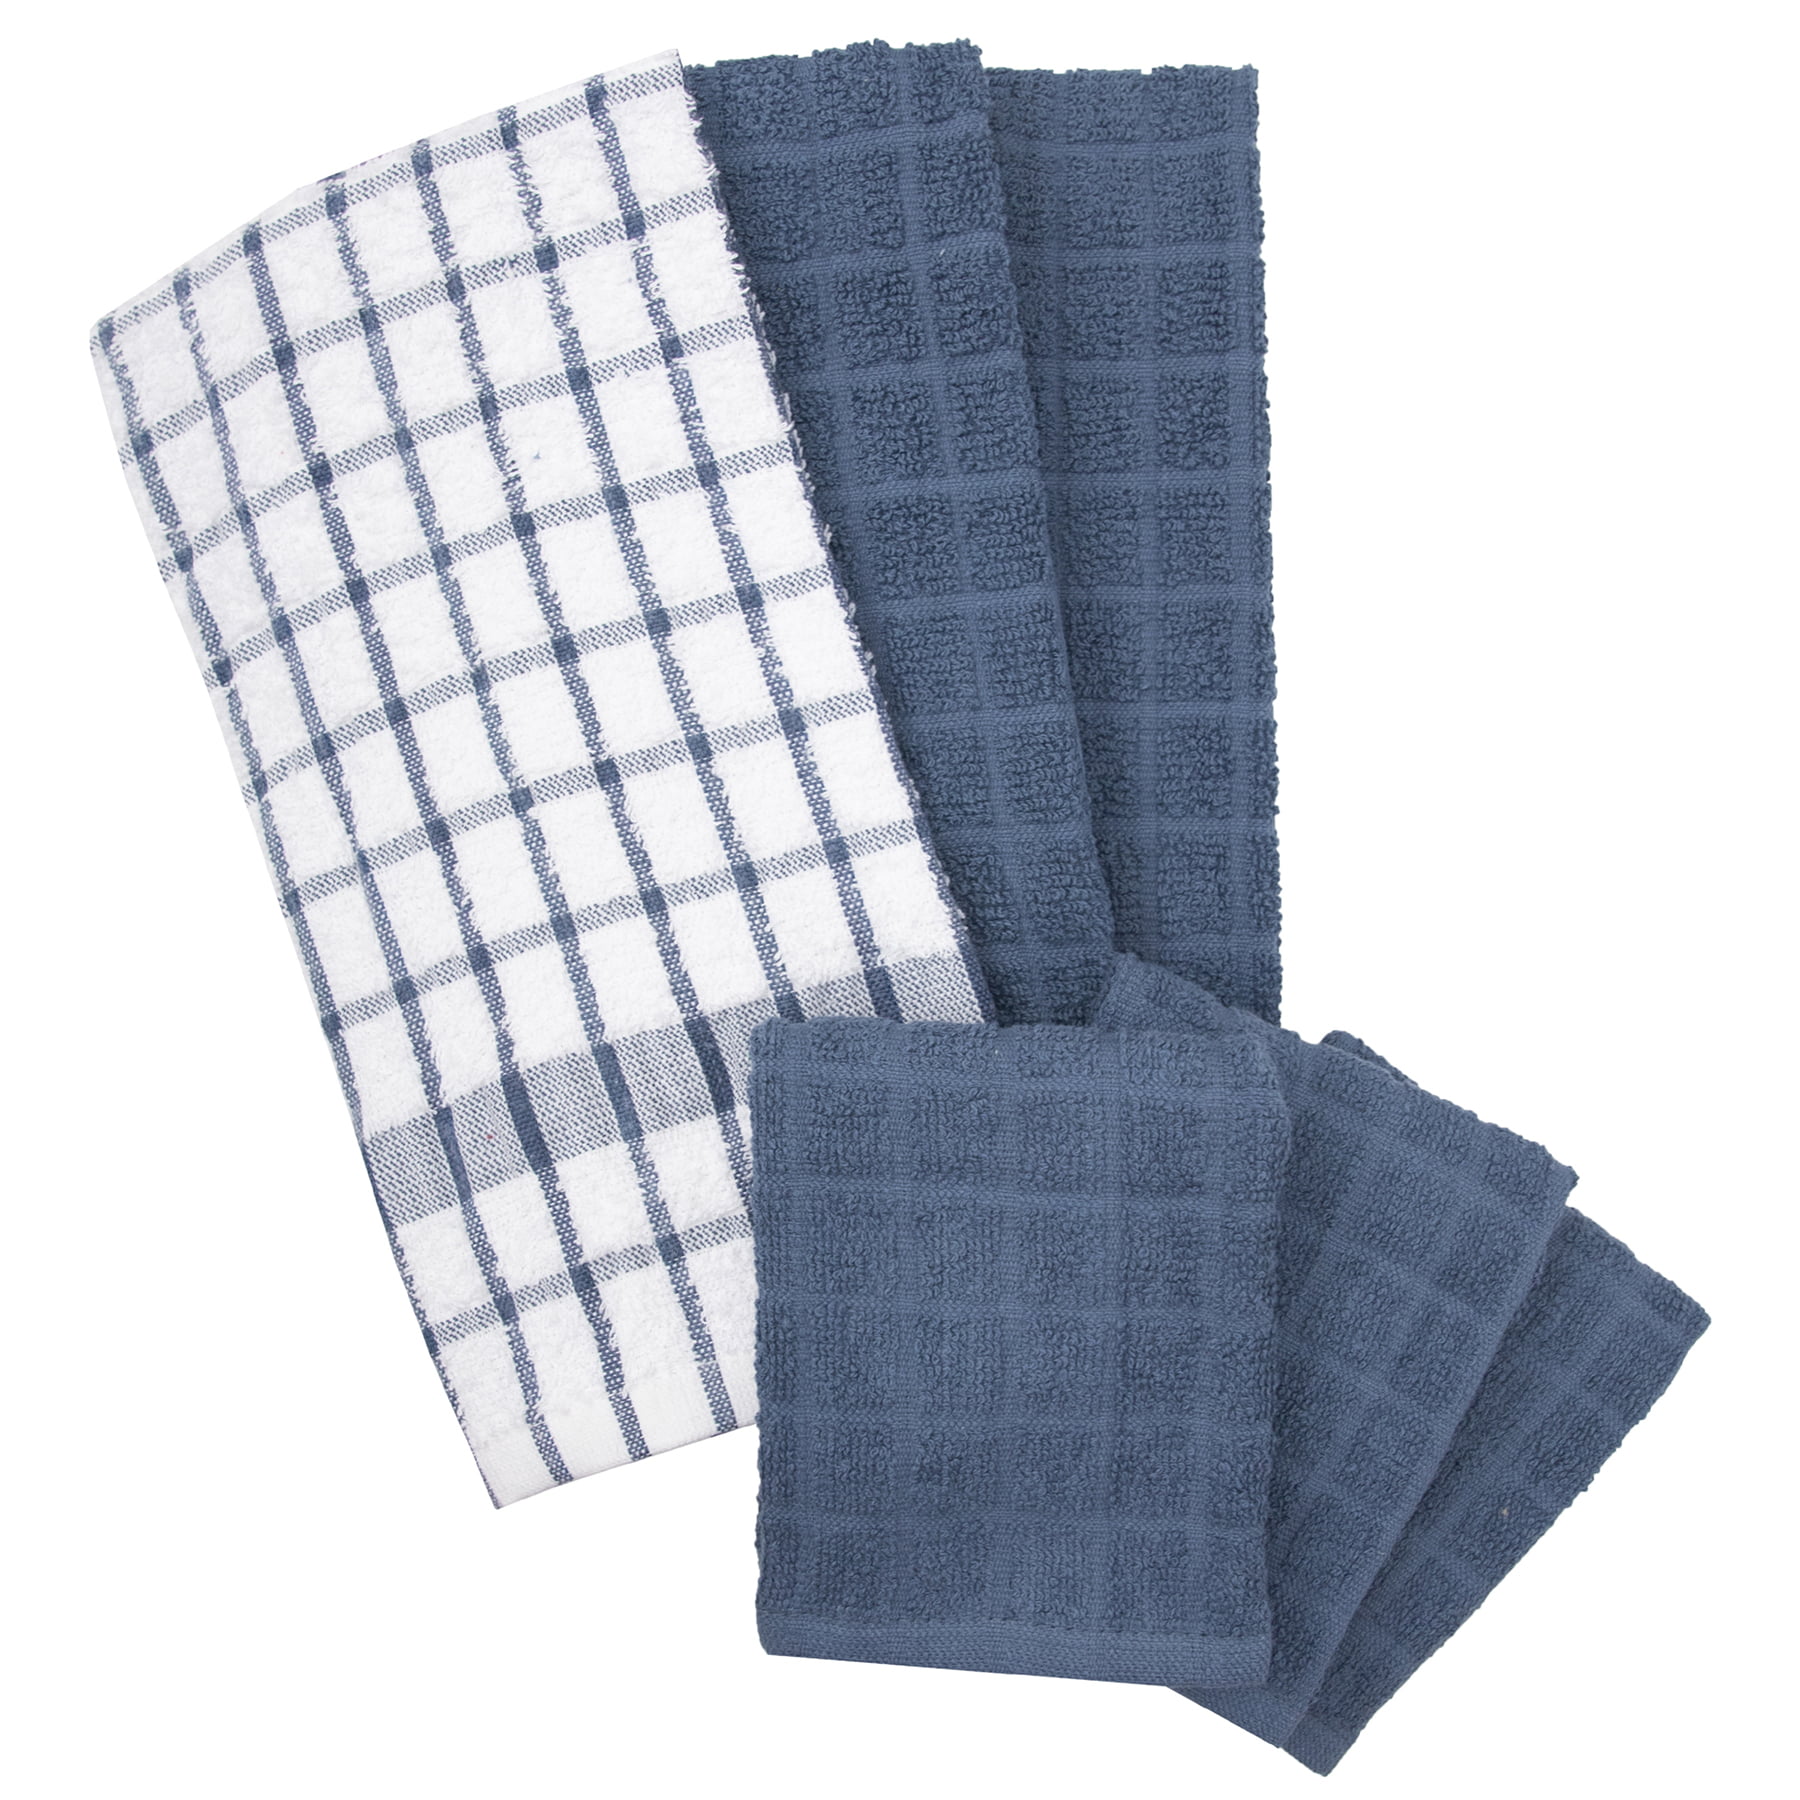 RITZ Federal Blue Terry Check Cotton Kitchen Towel Set of 3 82424A